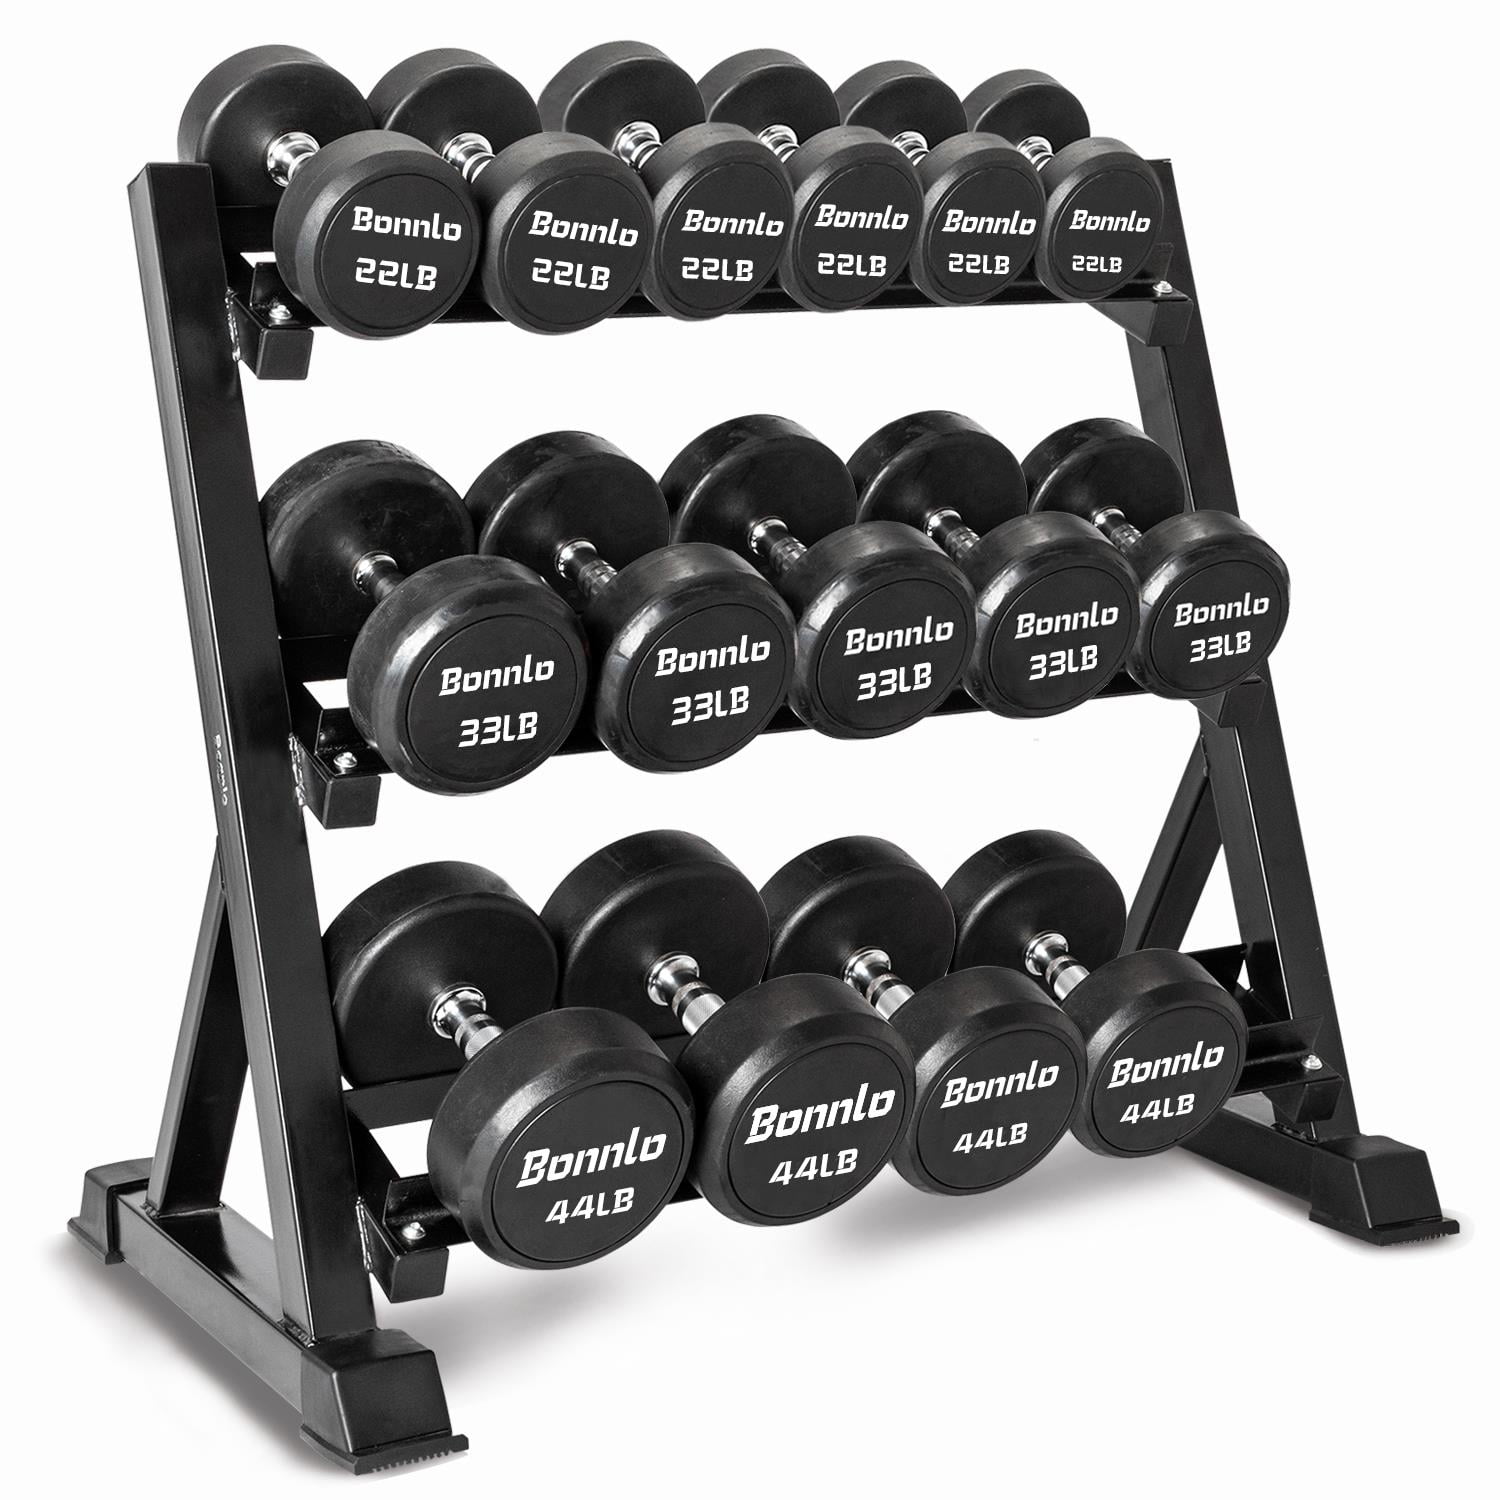 Marcy Compact Dumbbell Rack Free Weight Stand for Home Gym DBR-56 Black 20.50 x 8.50 x 27.00 inches 